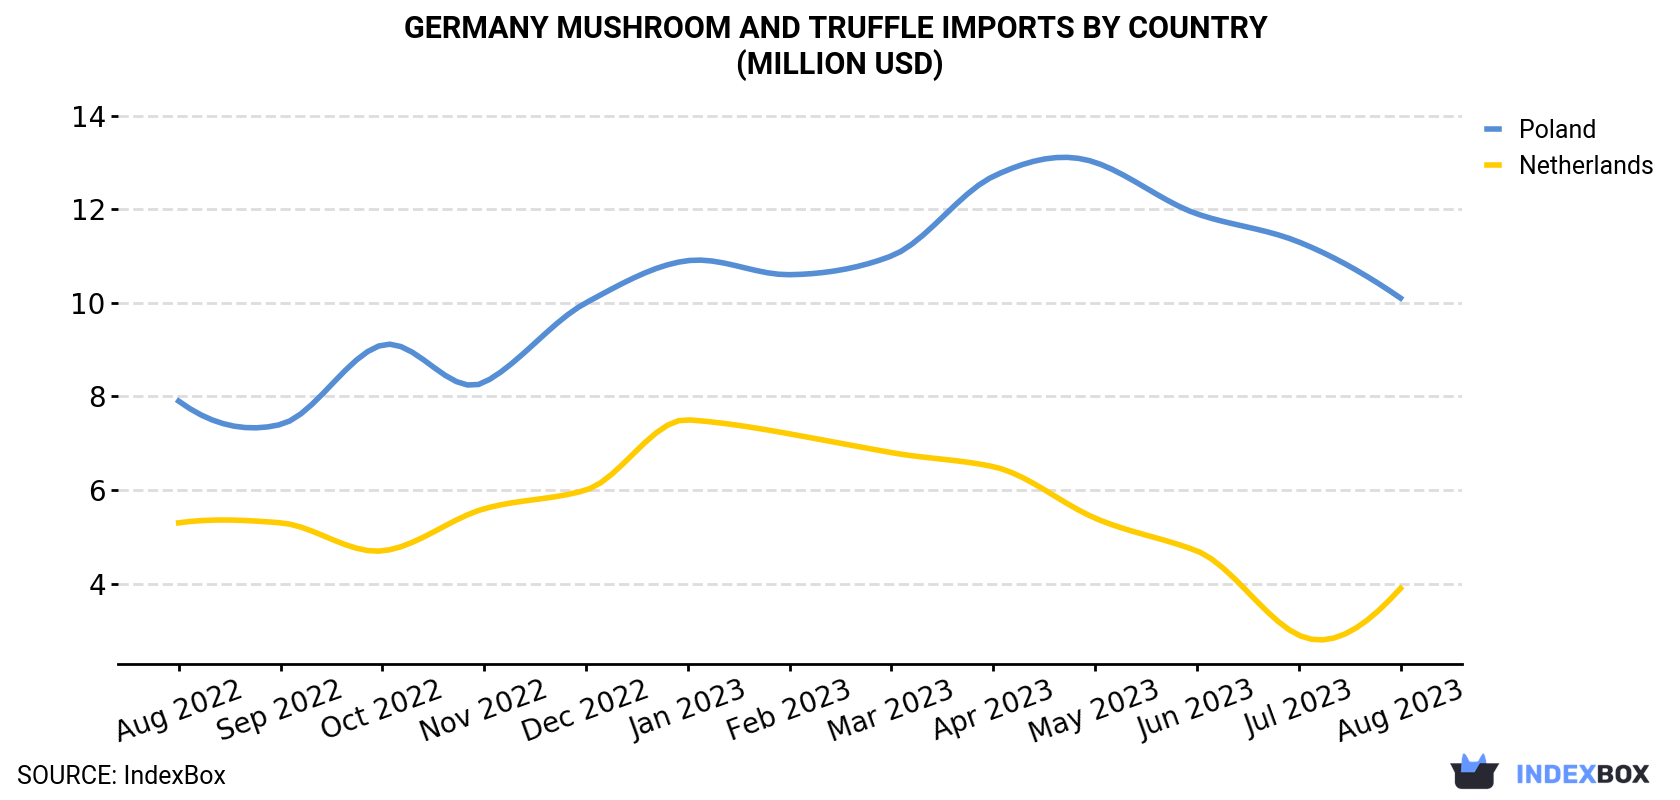 Germany Mushroom And Truffle Imports By Country (Million USD)